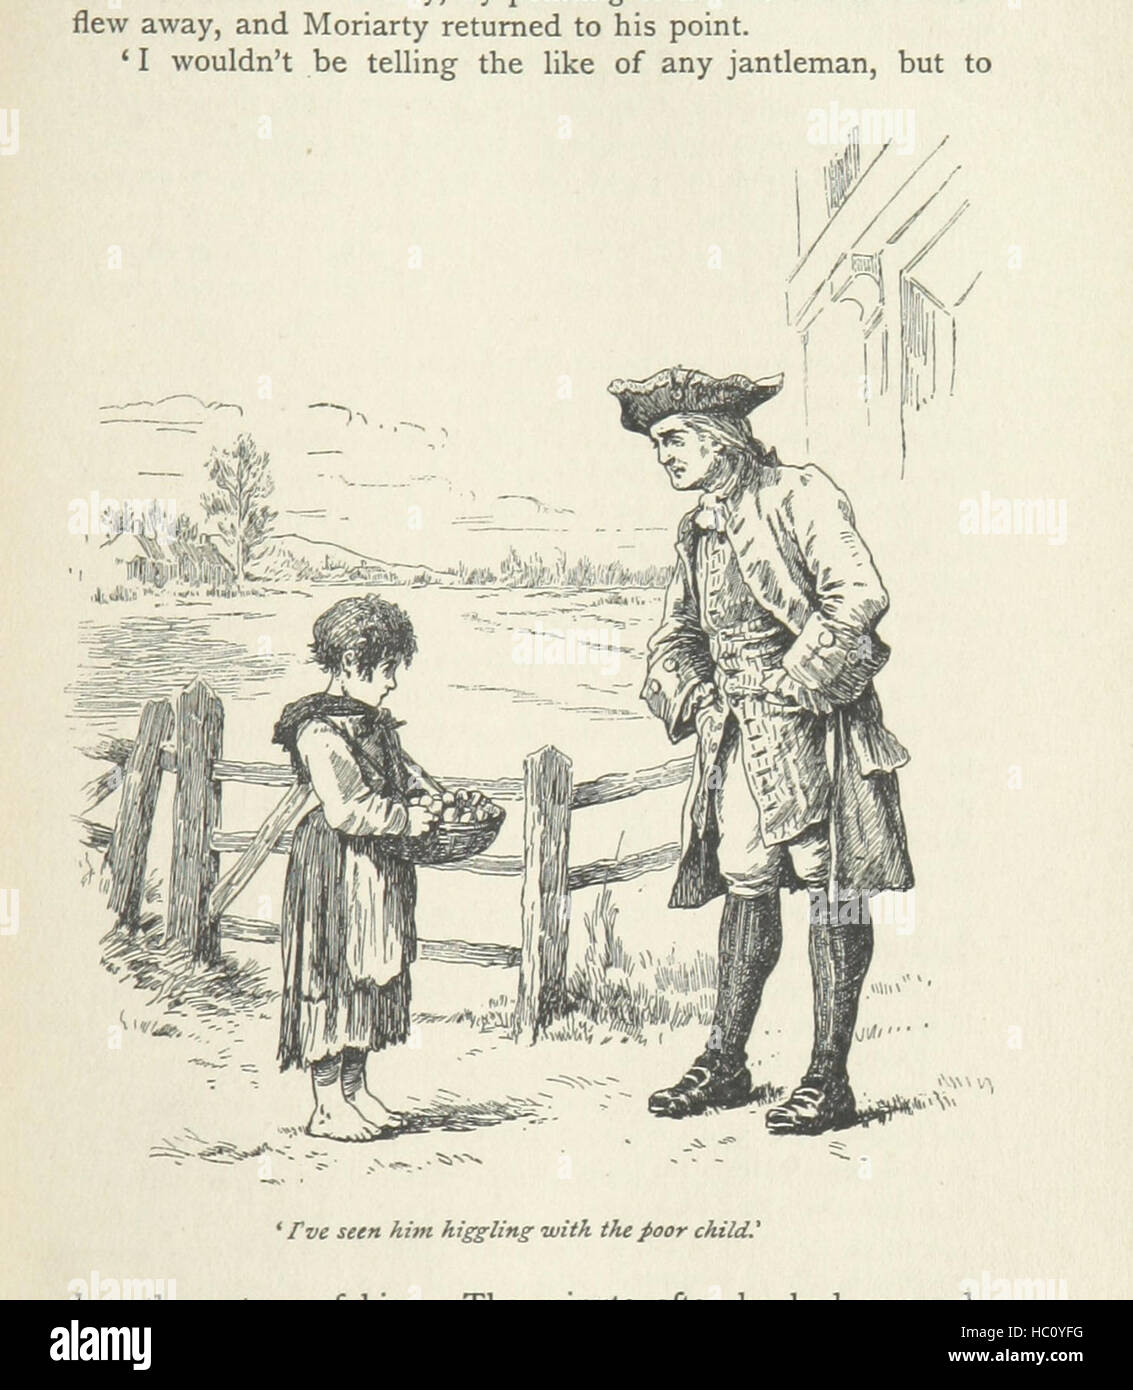 Image taken from page 117 of 'Ormond. A tale ... Illustrated by C. Schloesser. With an introduction by Anne Thackeray Ritchie' Image taken from page 117 of 'Ormond A tale Stock Photo